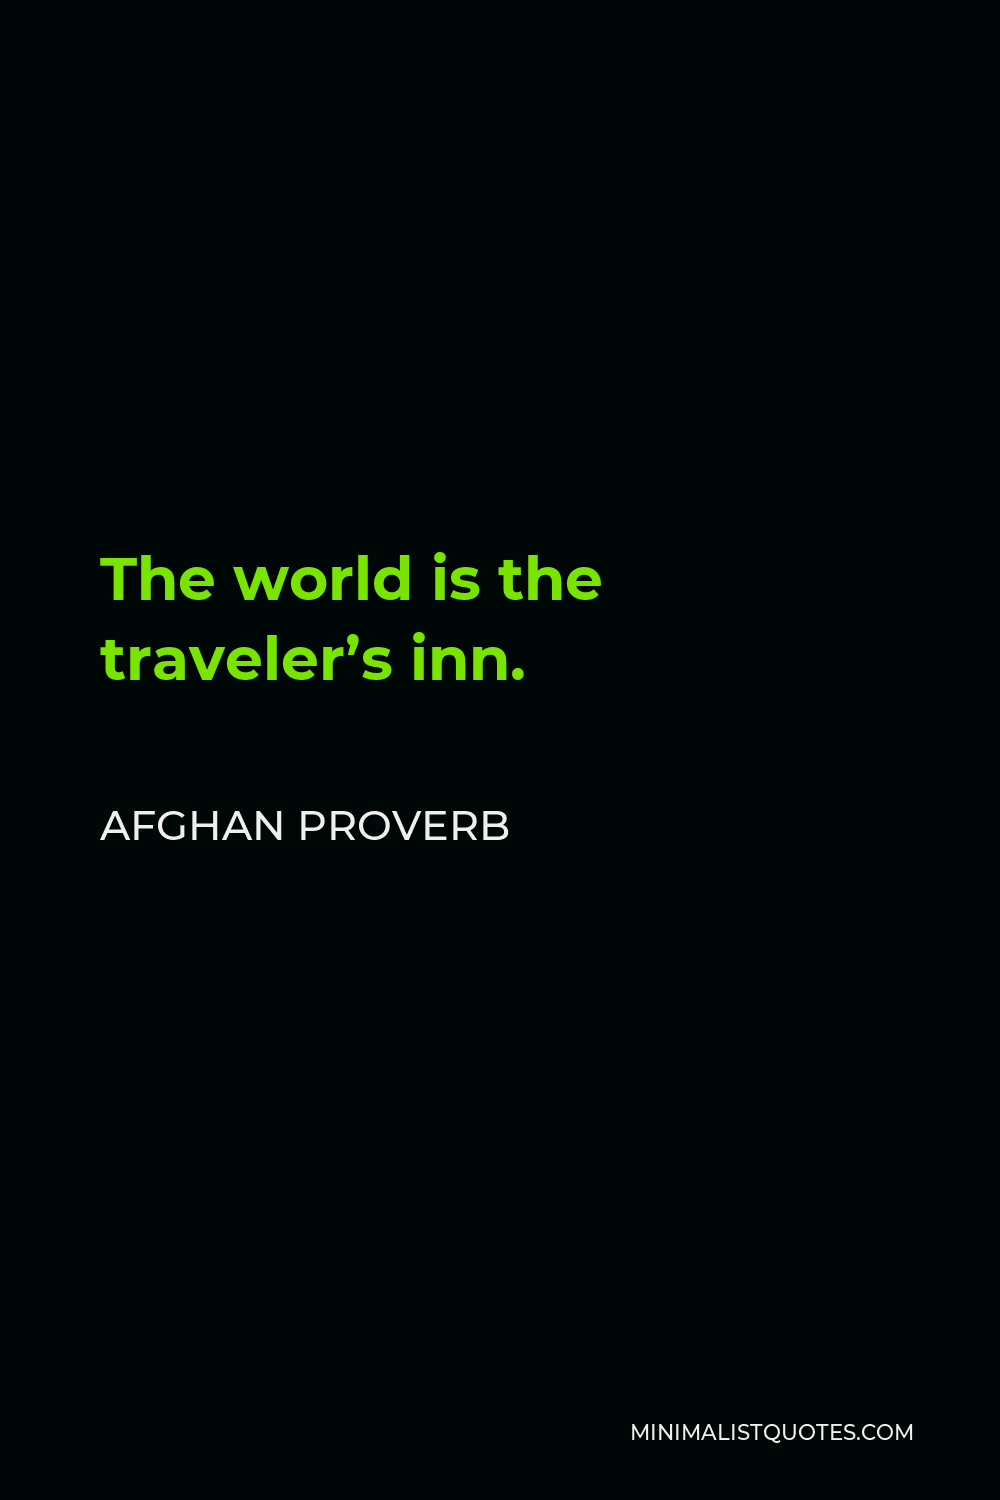 Afghan Proverb Quote - The world is the traveler’s inn.